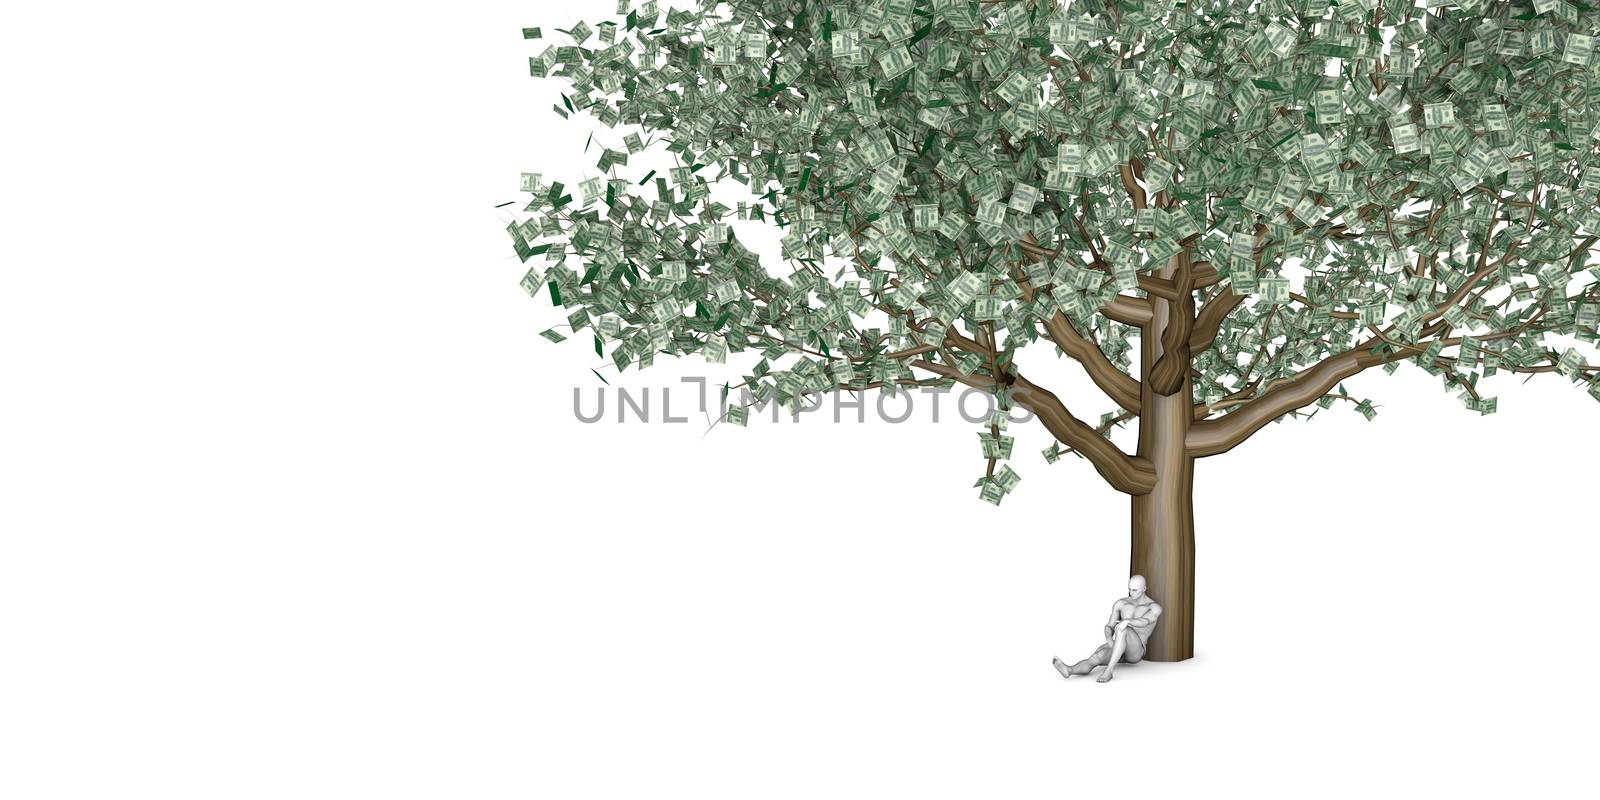 Man Sitting Underneath a Money Tree as Business Concept